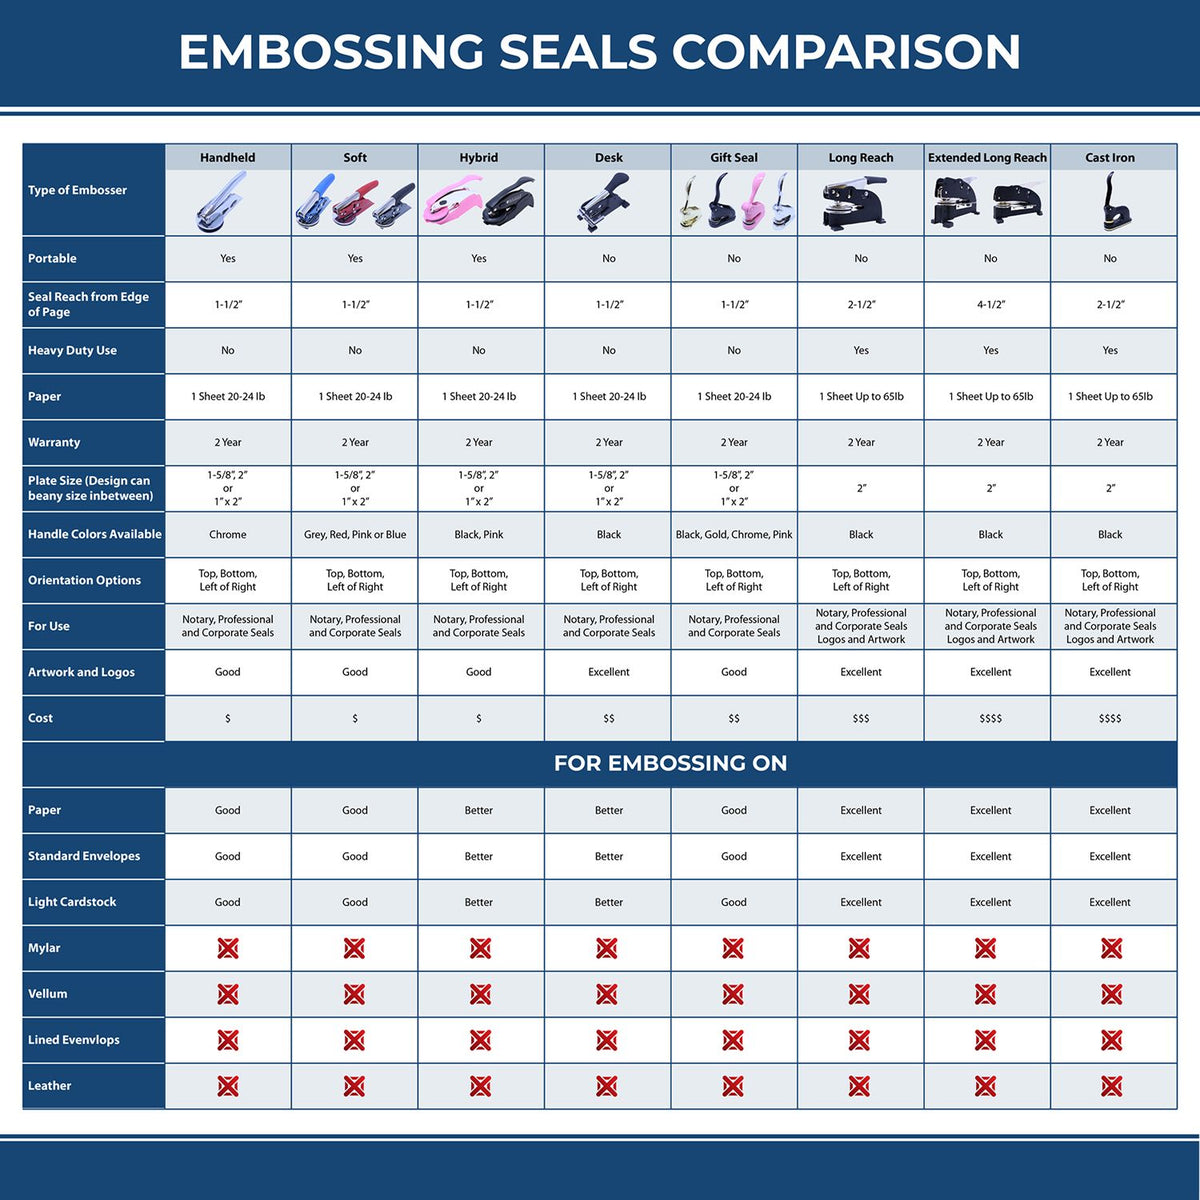 A comparison chart for the different types of mount models available for the Handheld Vermont Professional Engineer Embosser.